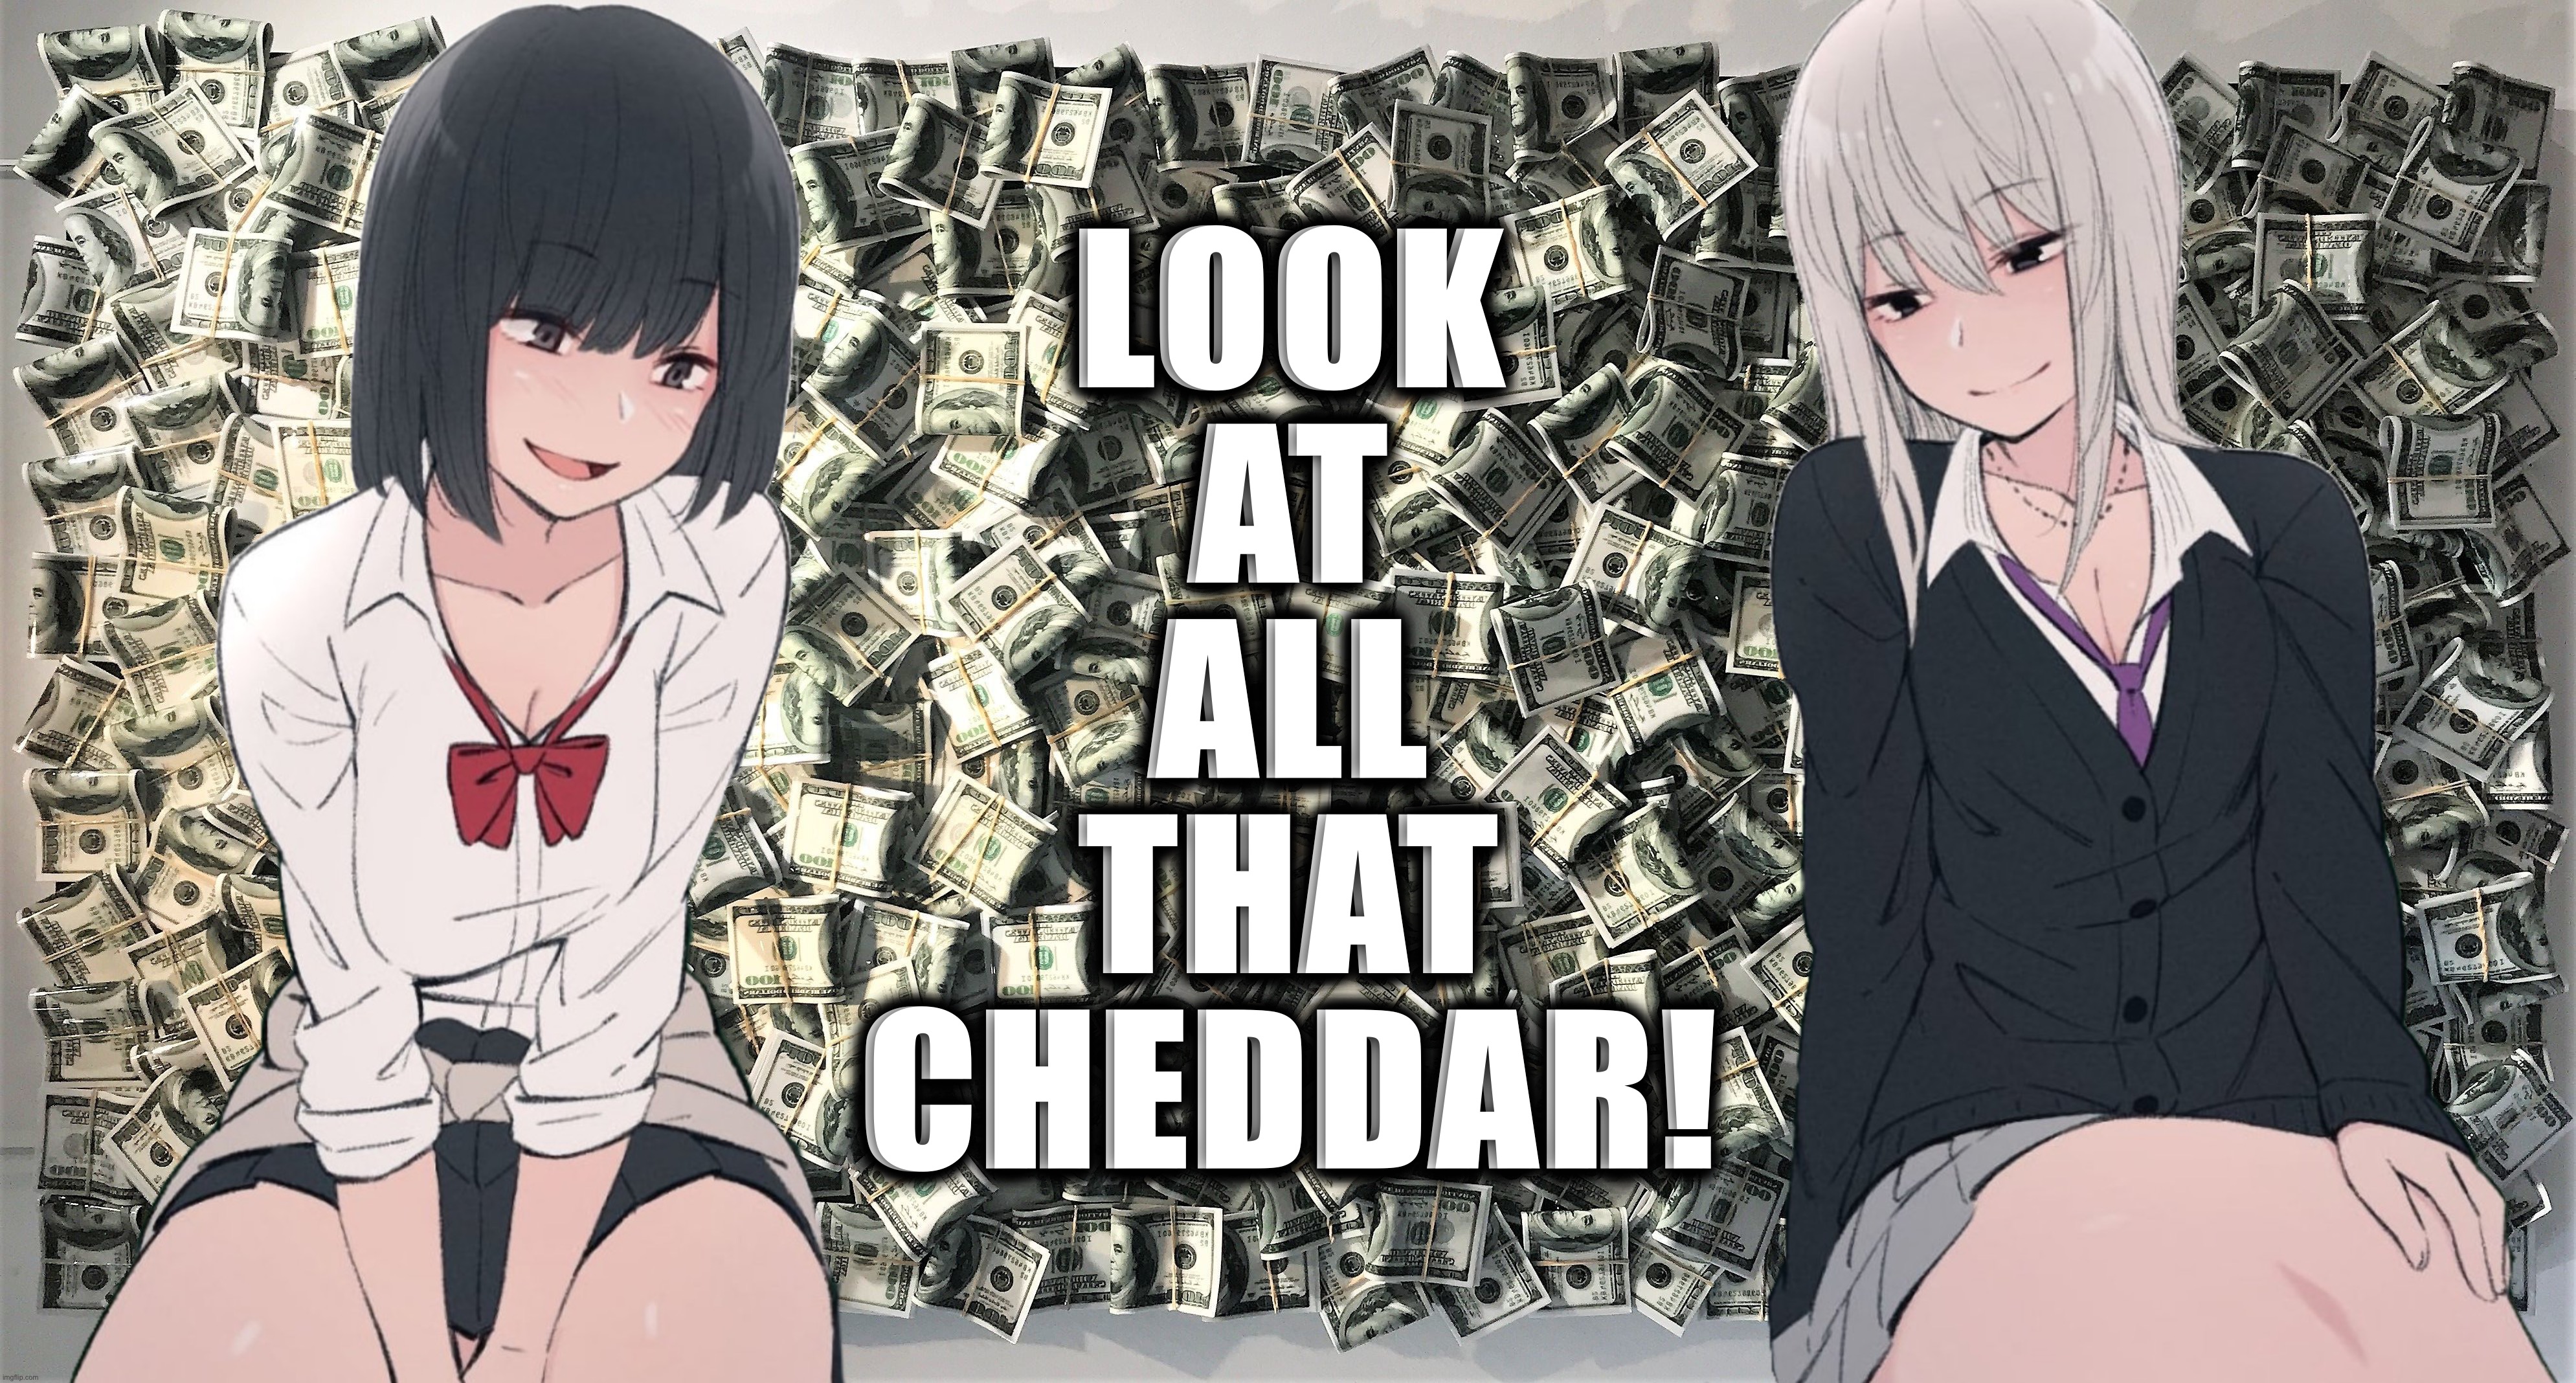 LOOK
AT
ALL
THAT
CHEDDAR! | image tagged in look at all that cheddar,rich kids,make money,true love,in terms of money,show me the money | made w/ Imgflip meme maker